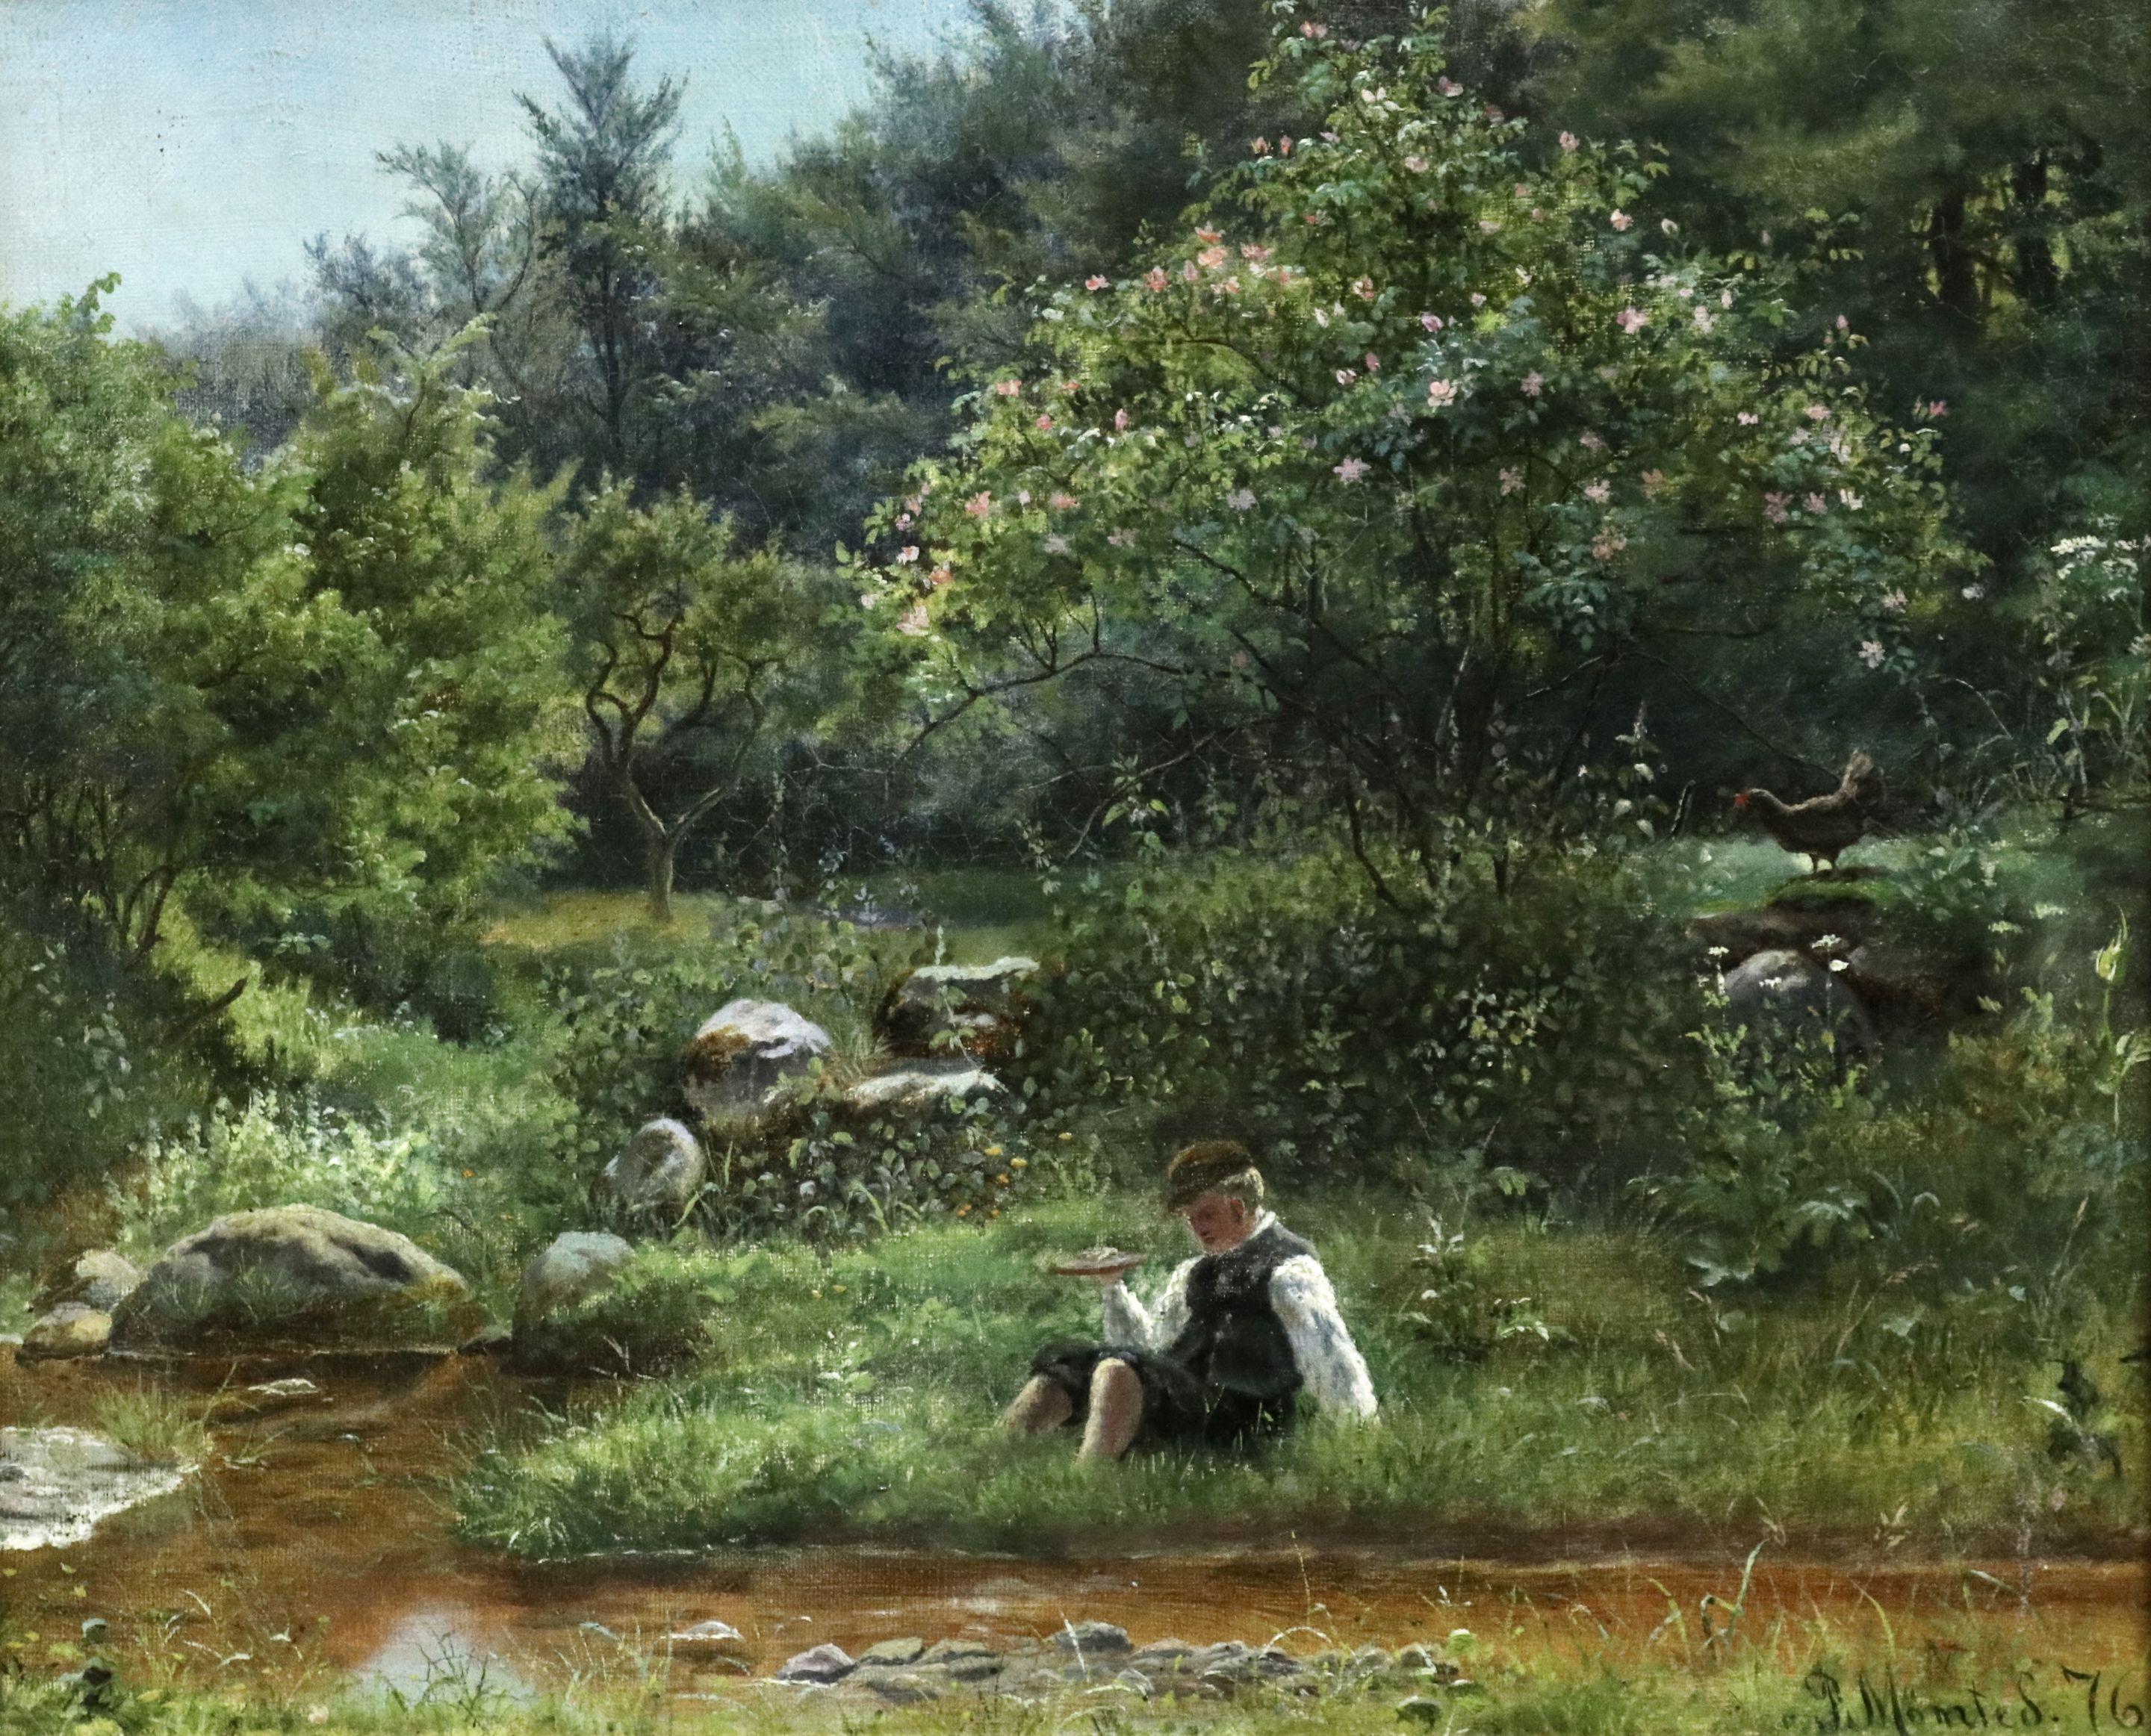 Peder Mørk Mønsted Landscape Painting - Young Boy Fishing by Stream - 19th Century Oil, Figures in Landscape by Monsted